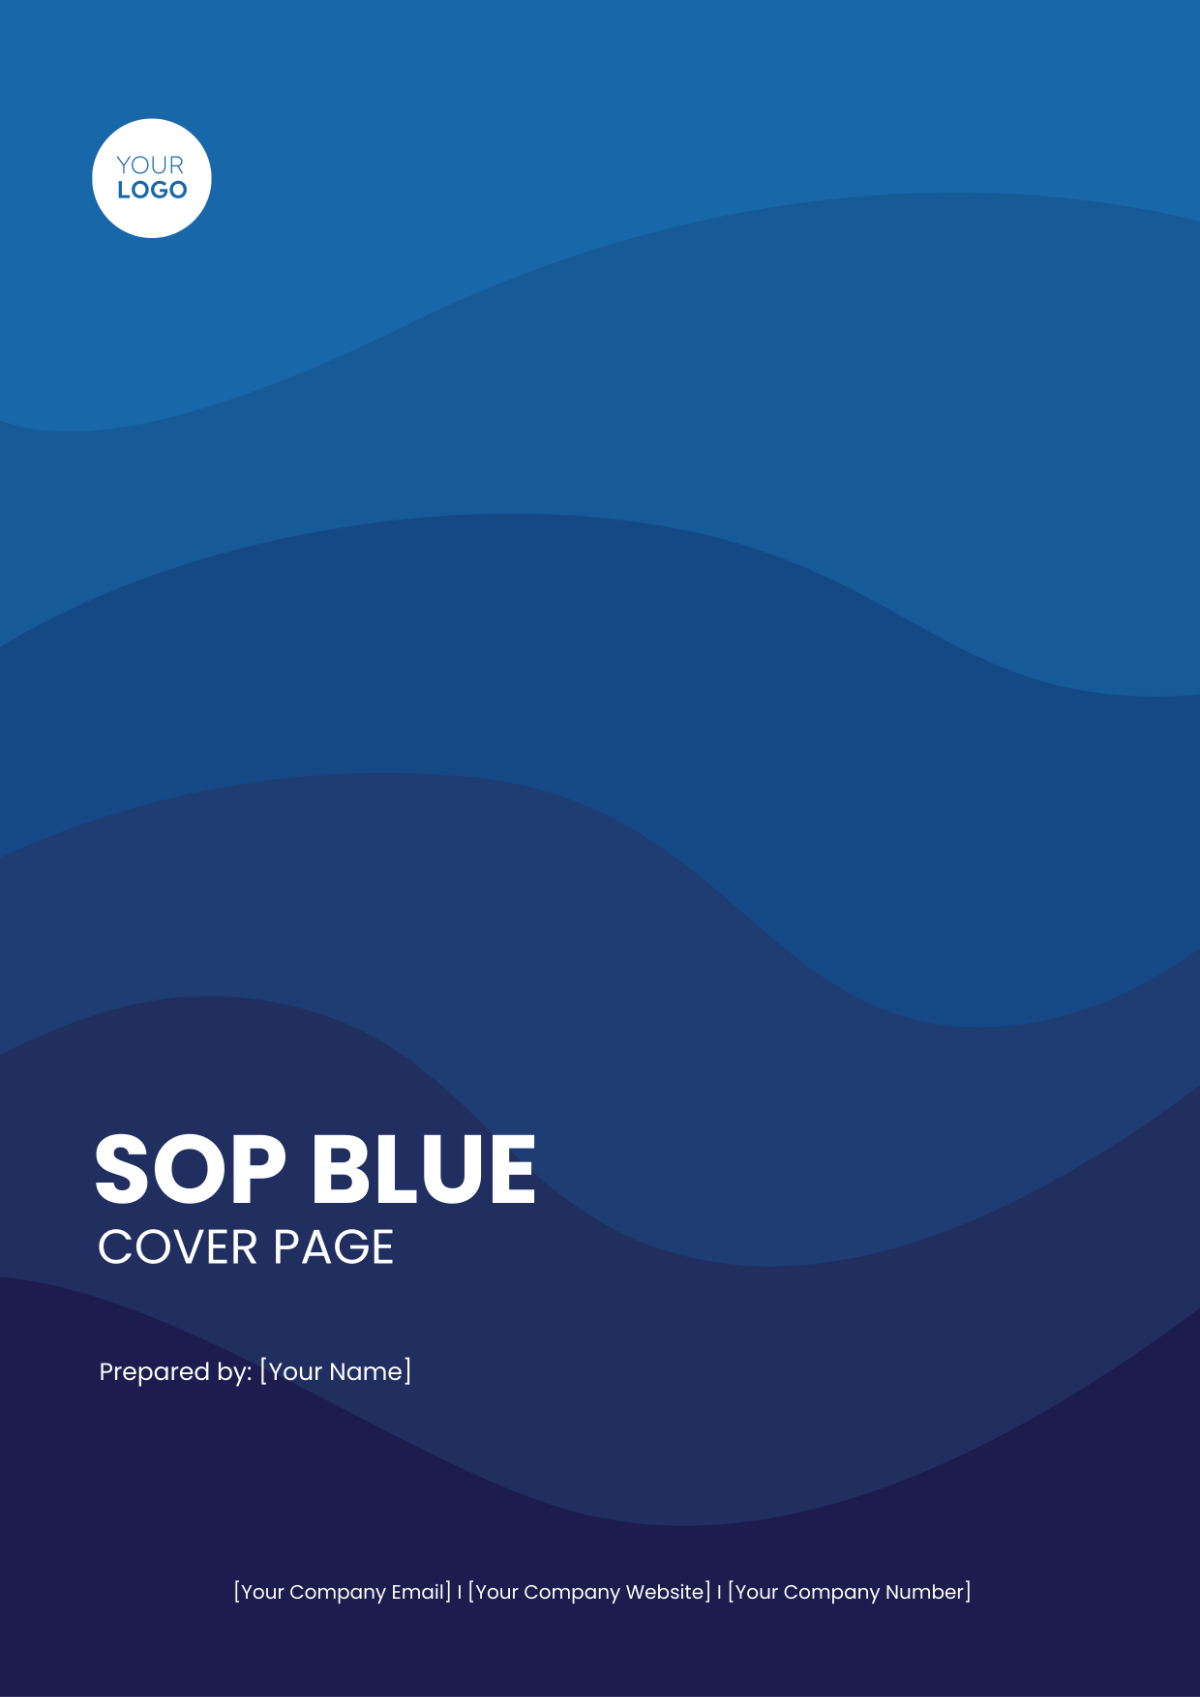 SOP Blue Cover Page